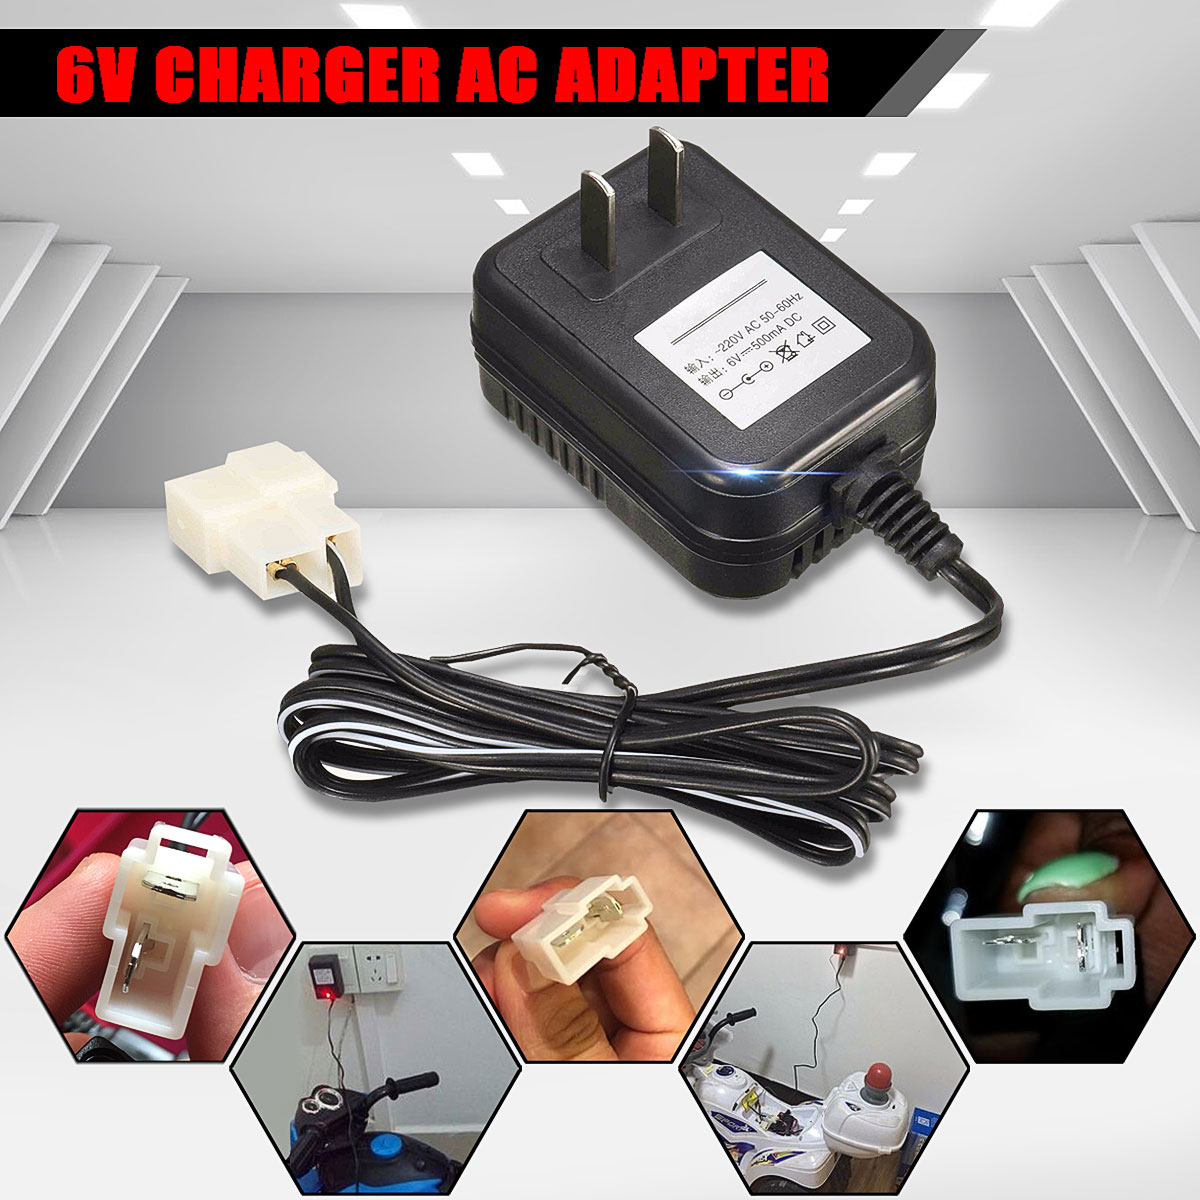 Wall-Charger-AC-Adapter-for-KID-TRAX-ATV-Quad-6V-Battery-Powered-Ride-1363257-2